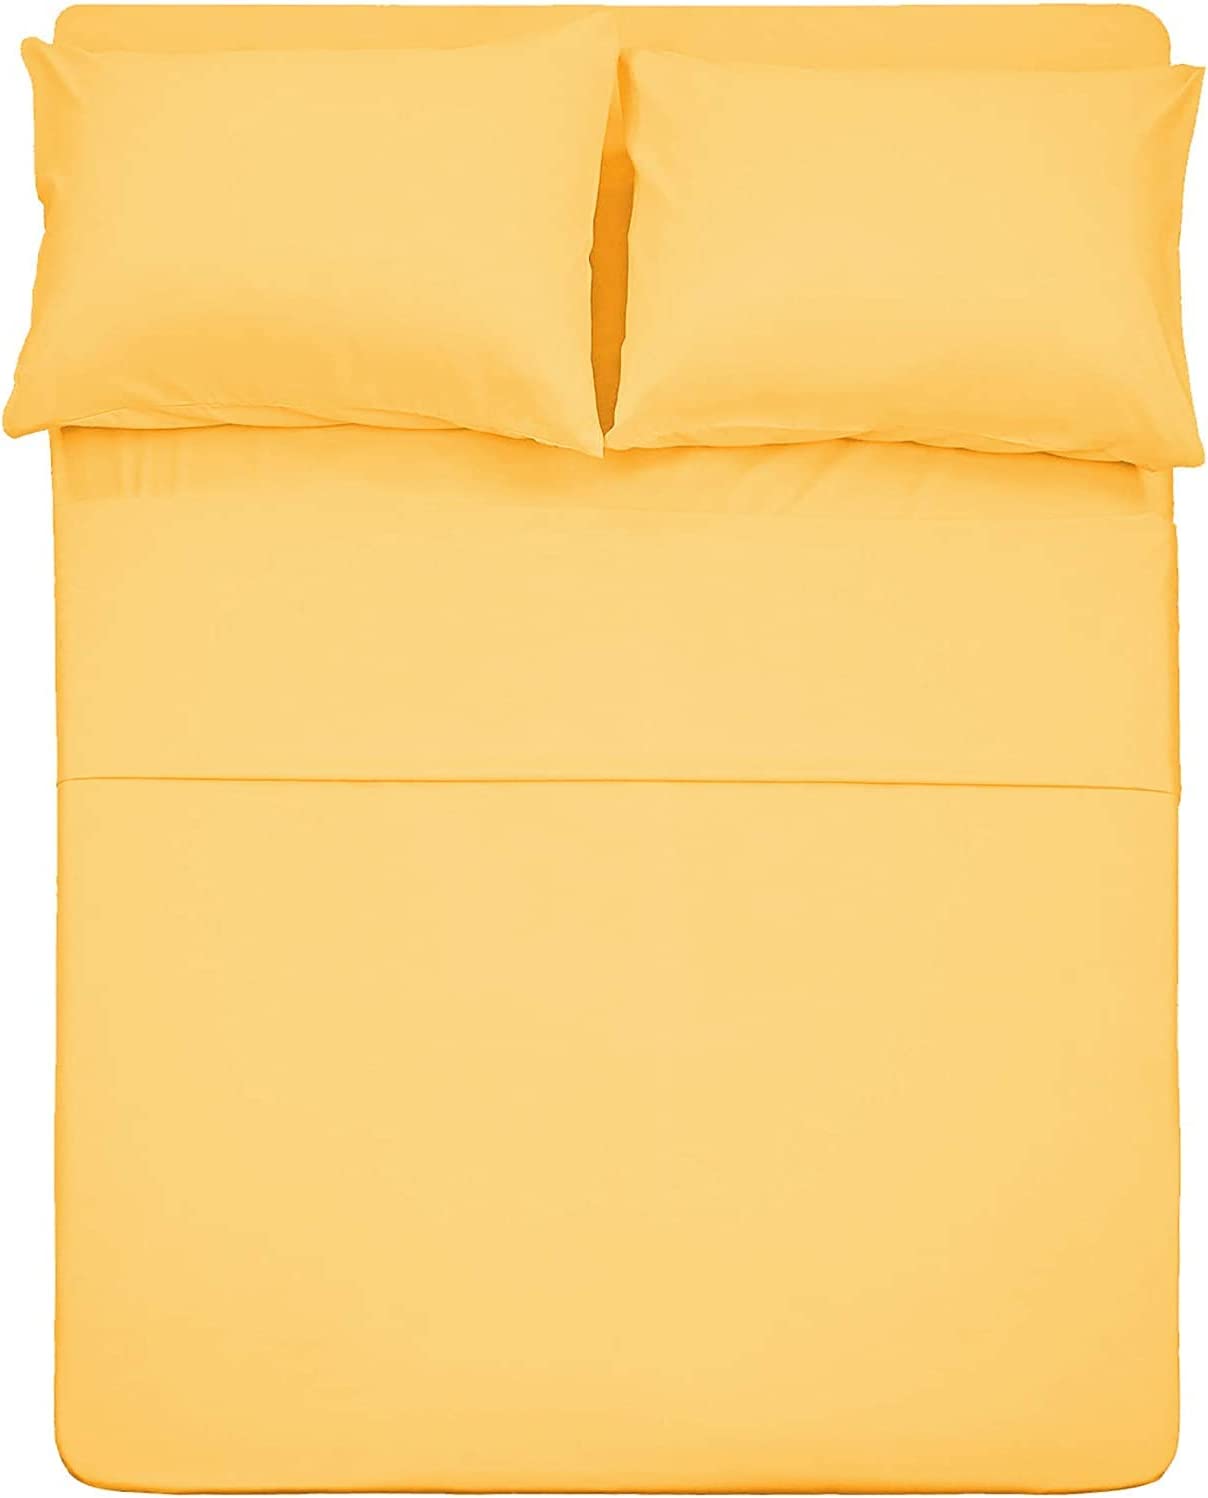 Best Season Luxury Microfiber Bed Sheets For College, 4-Piece